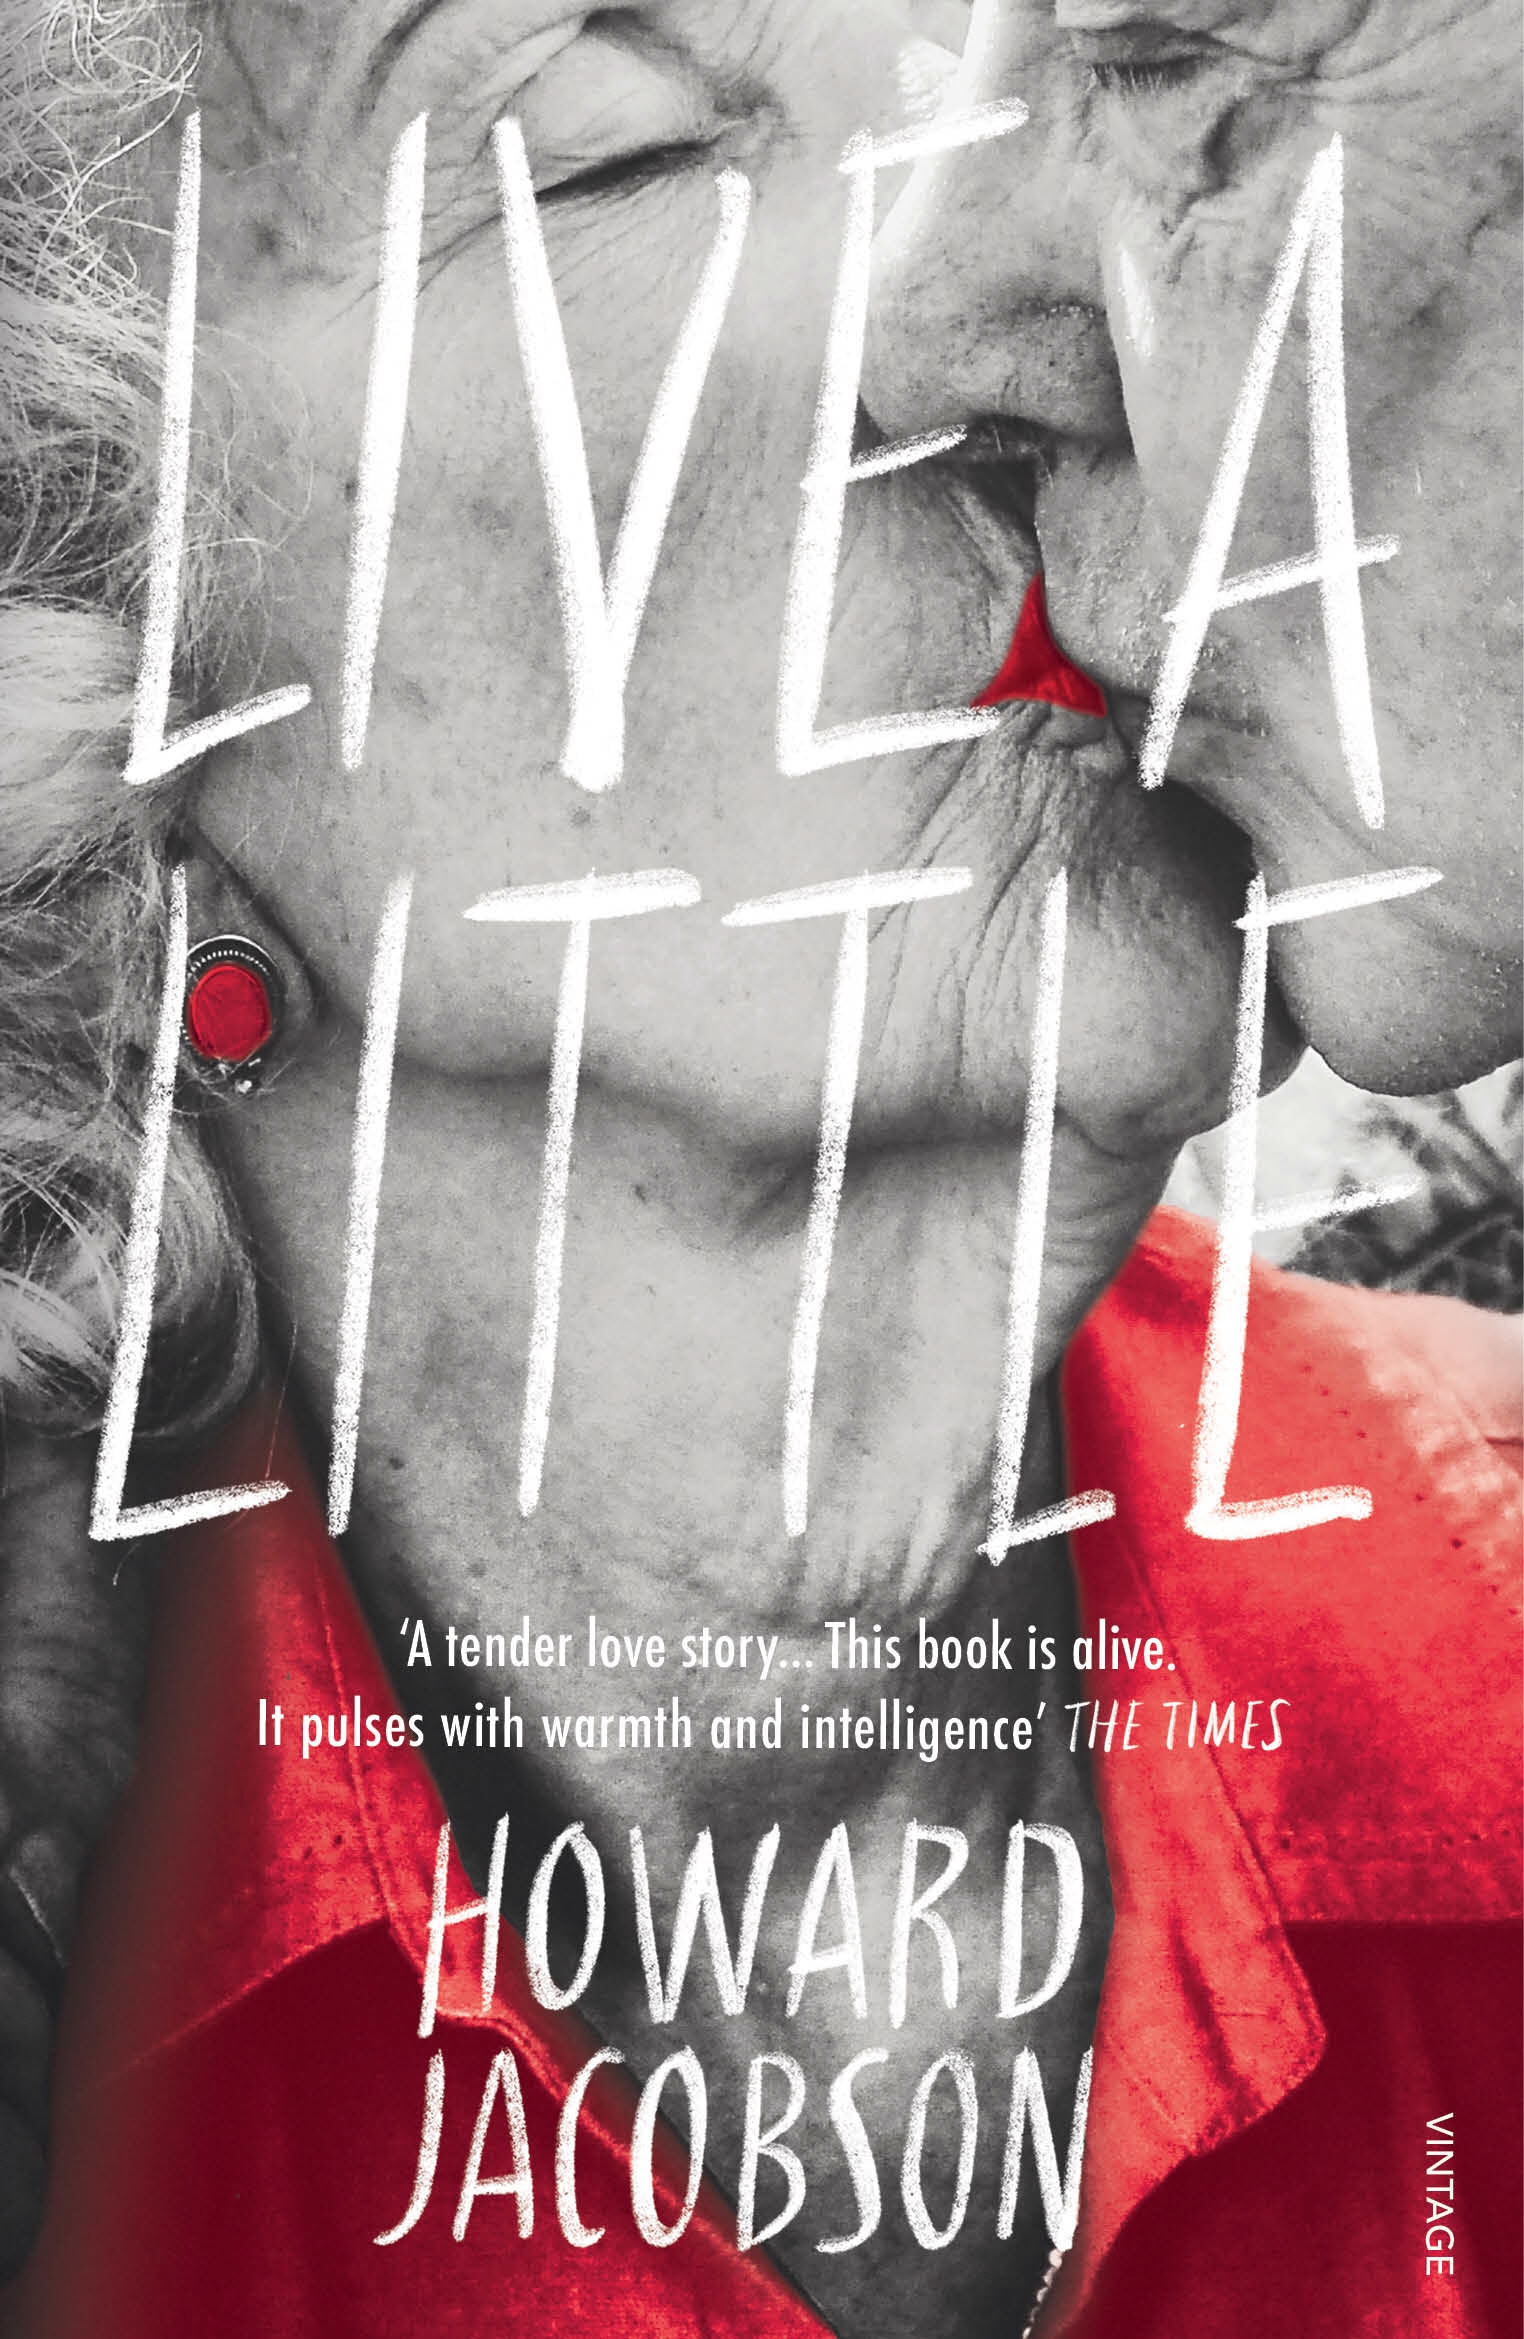 Book “Live a Little” by Howard Jacobson — August 6, 2020